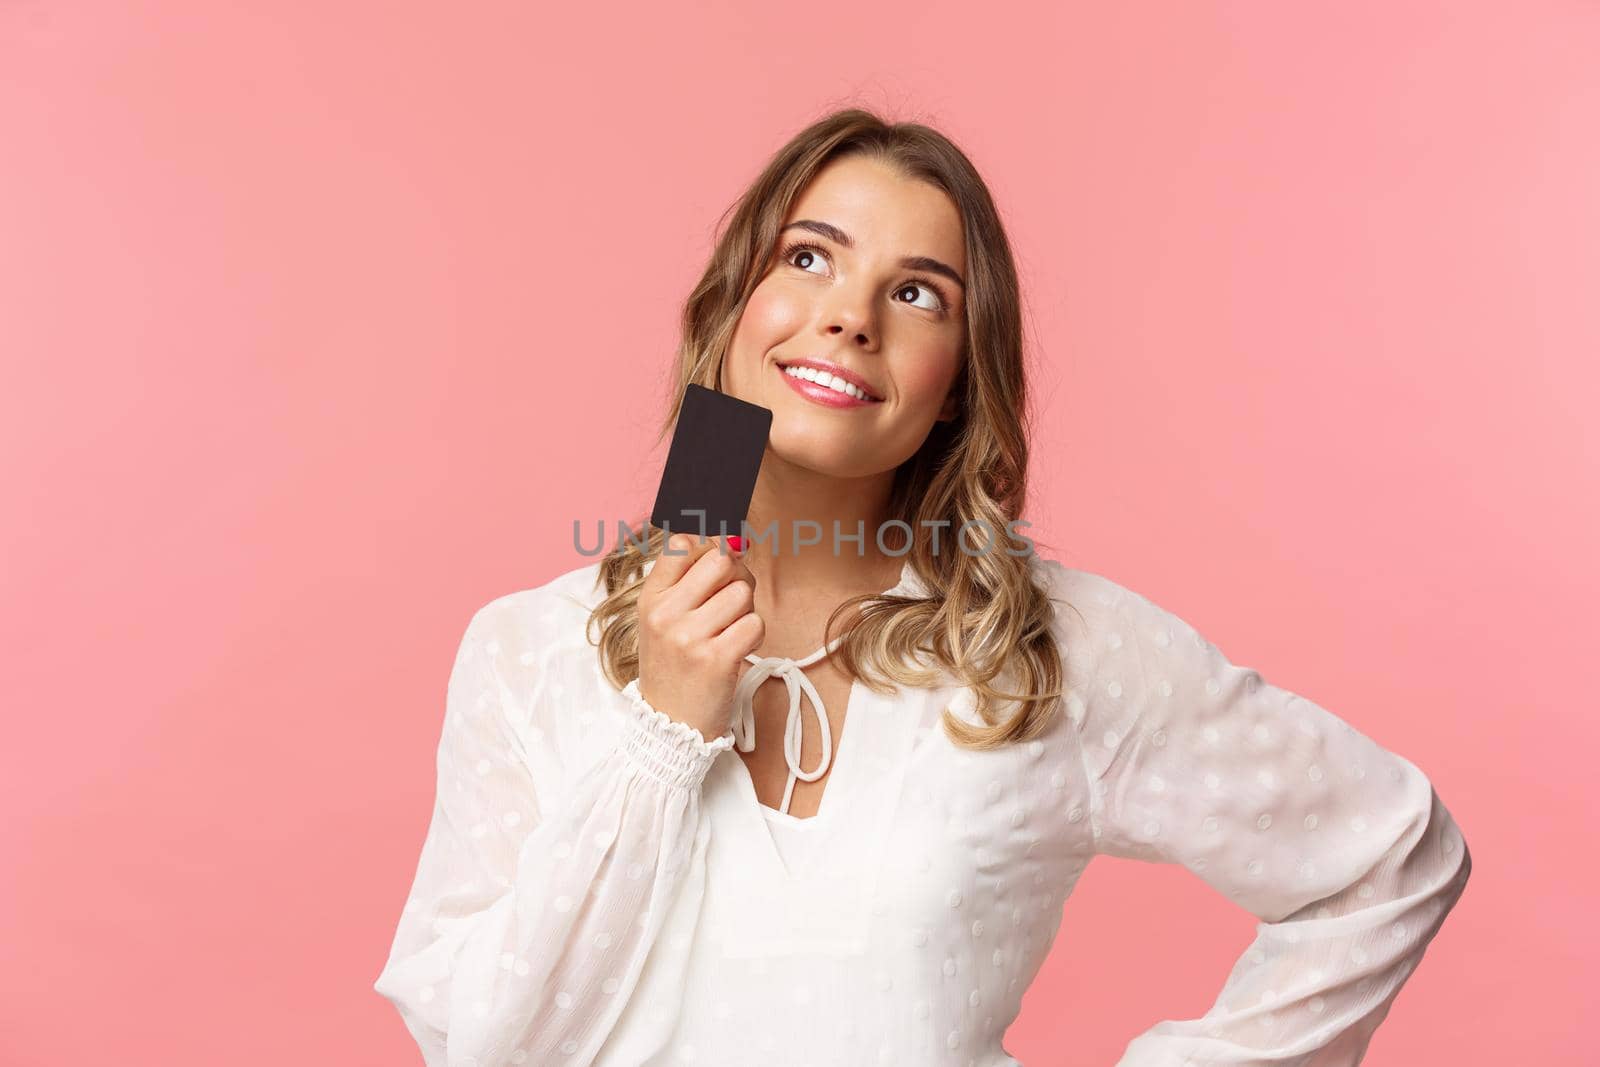 Close-up portrait of thoughtful and creative blond woman in white dress, touching chin with credit card and smiling dreamy as looking up and thinking, picturing what buy as present, pink background.